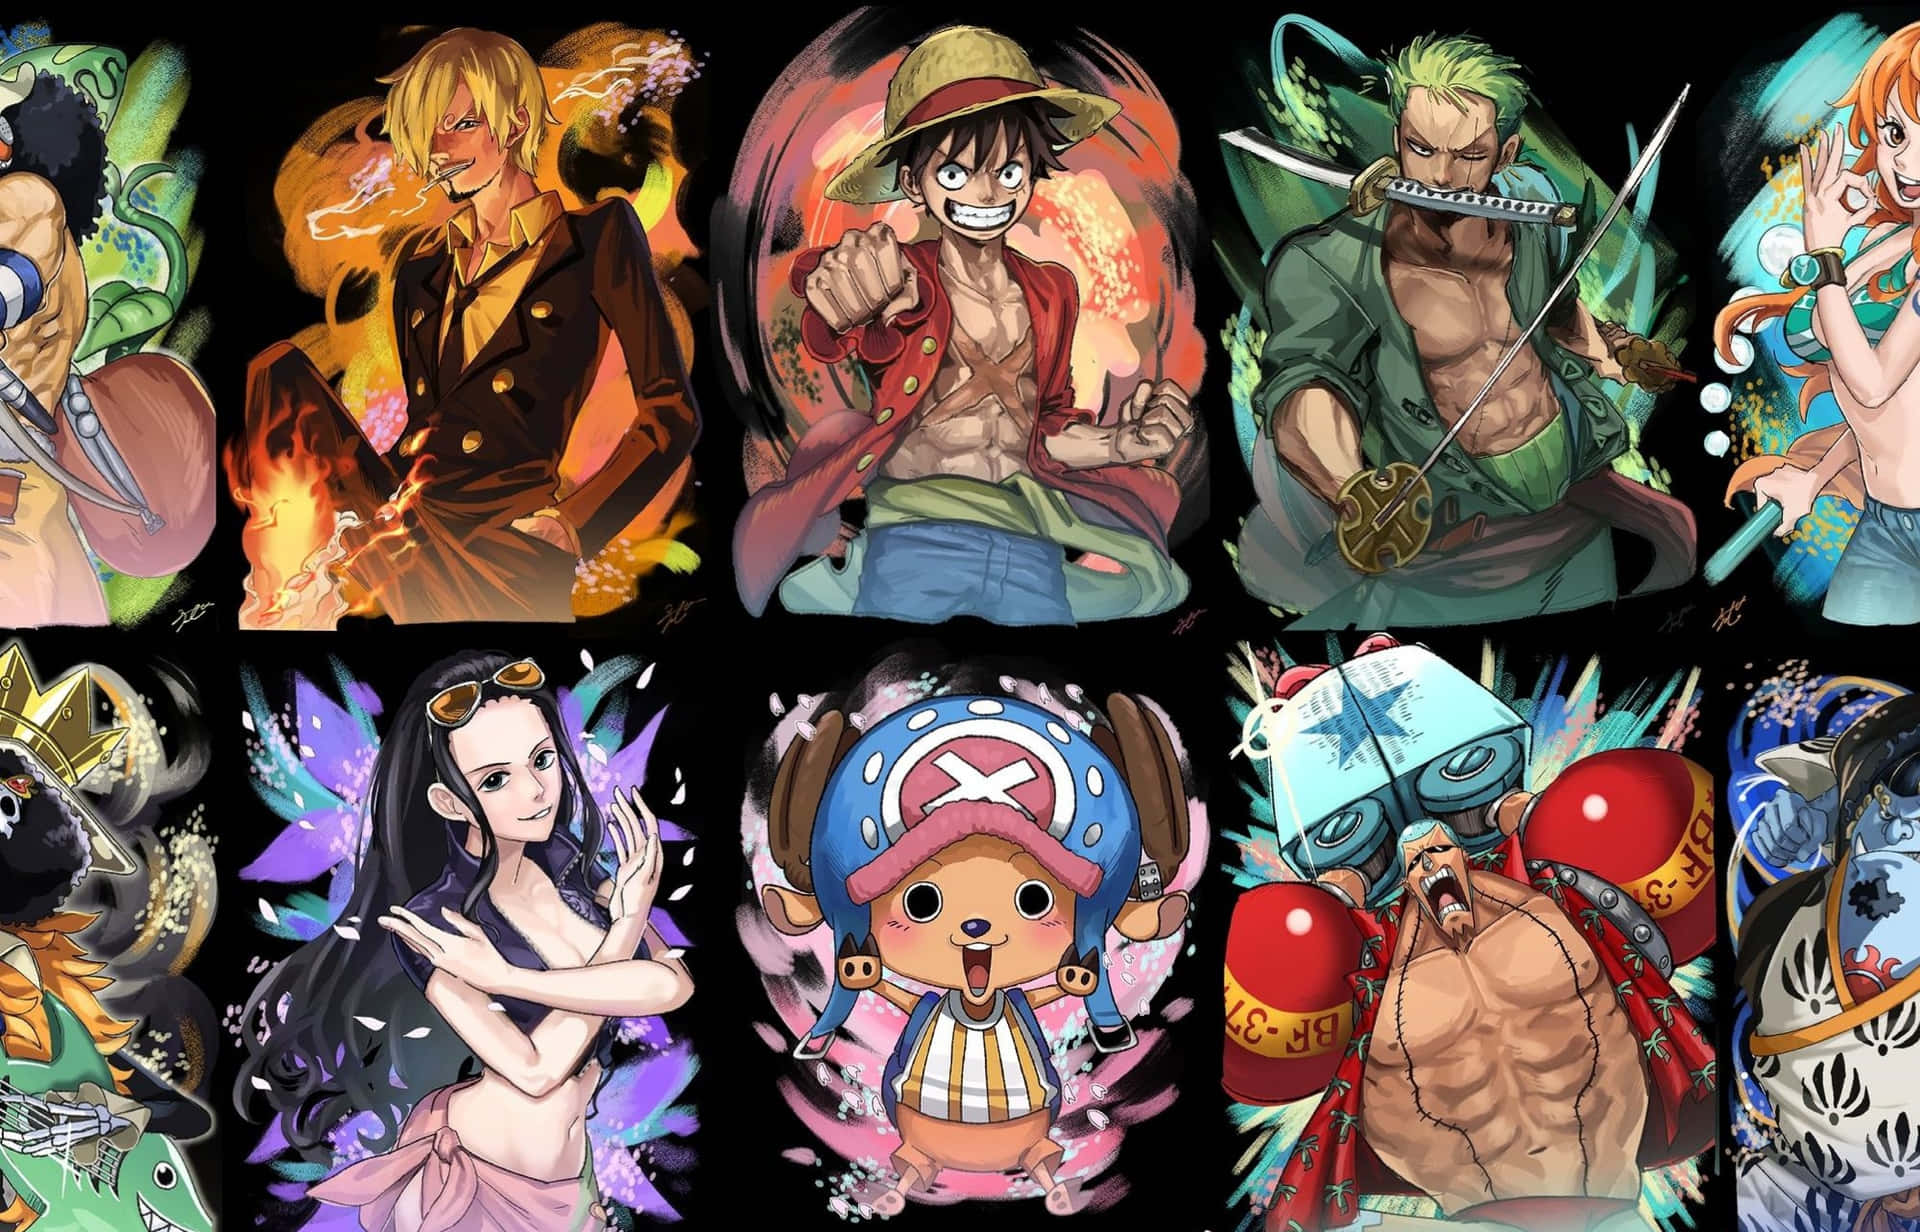 Strawhat Pirates One Piece Anime Collage - Strohhutpiraten One Piece Anime Collage Wallpaper